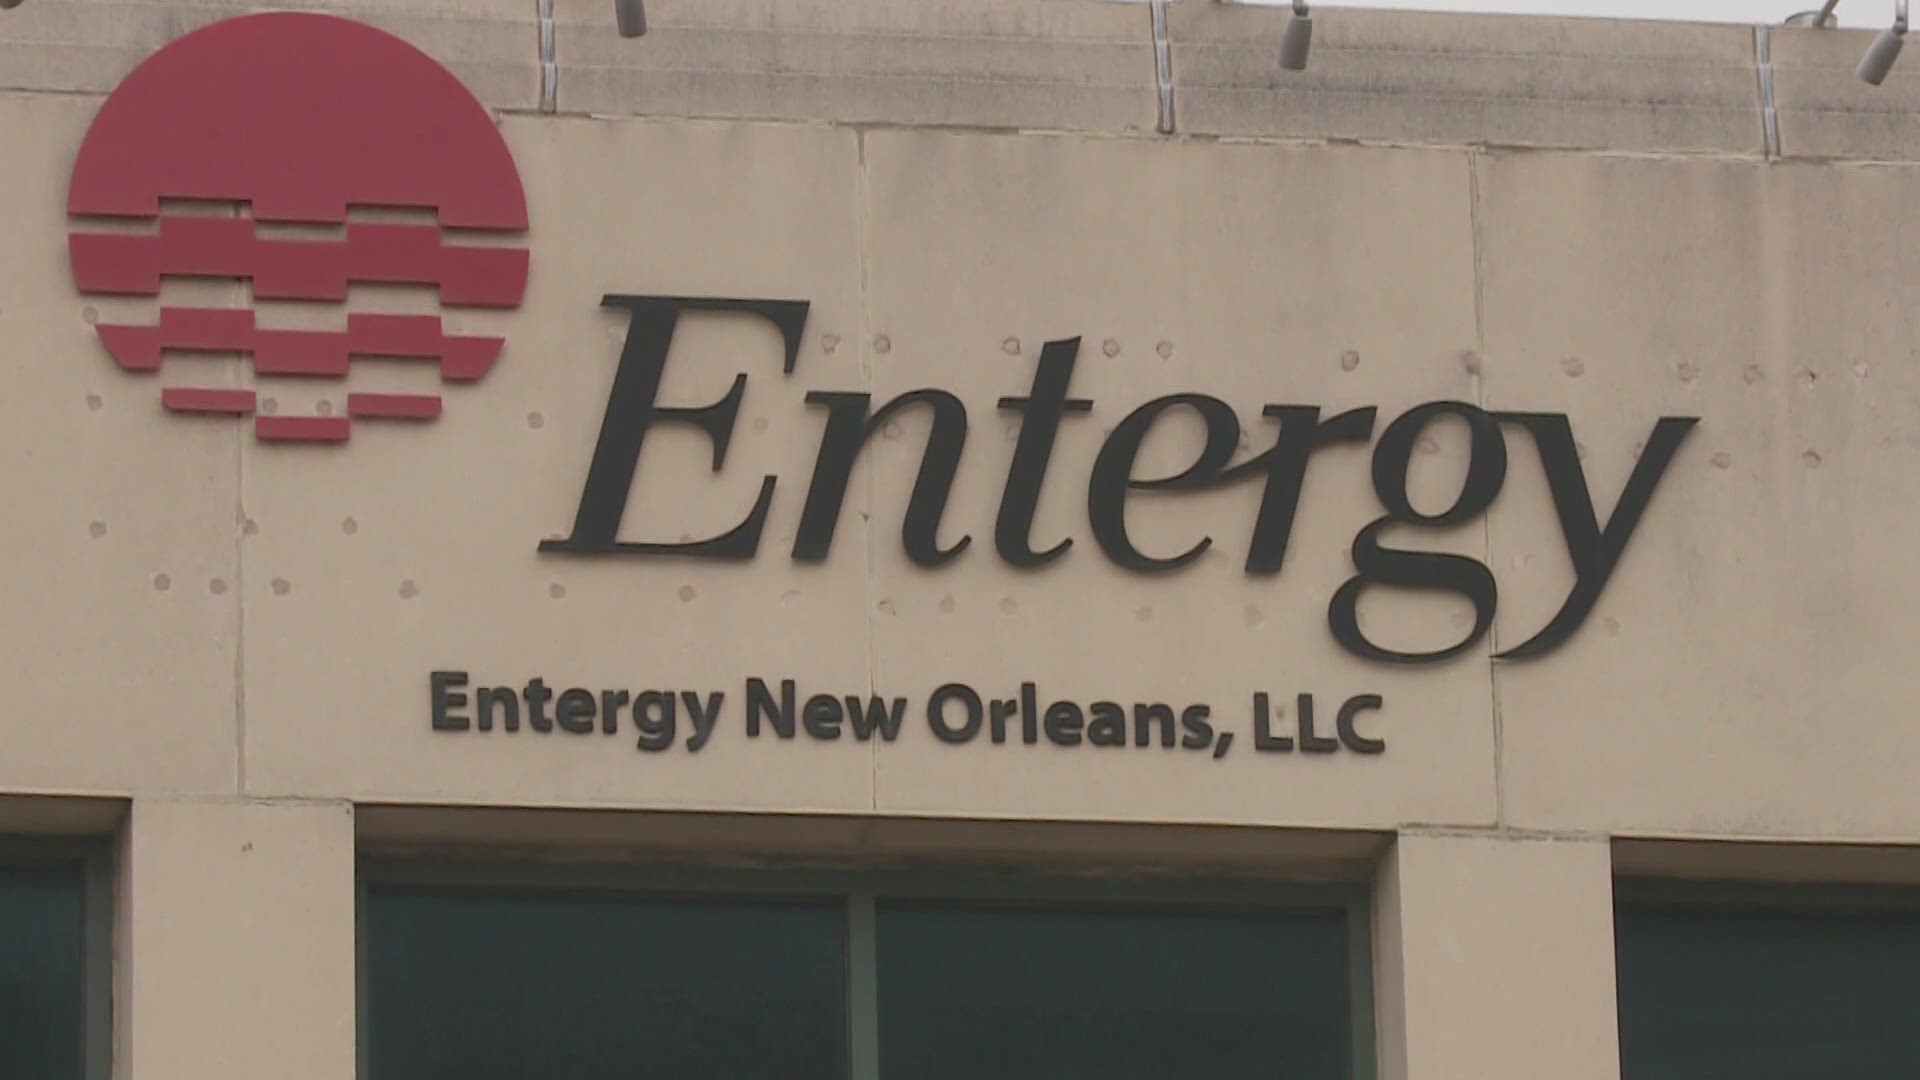 Customers of Entergy New Orleans say they were frustrated by both the rolling blackouts Tuesday and the lack of advance notice.